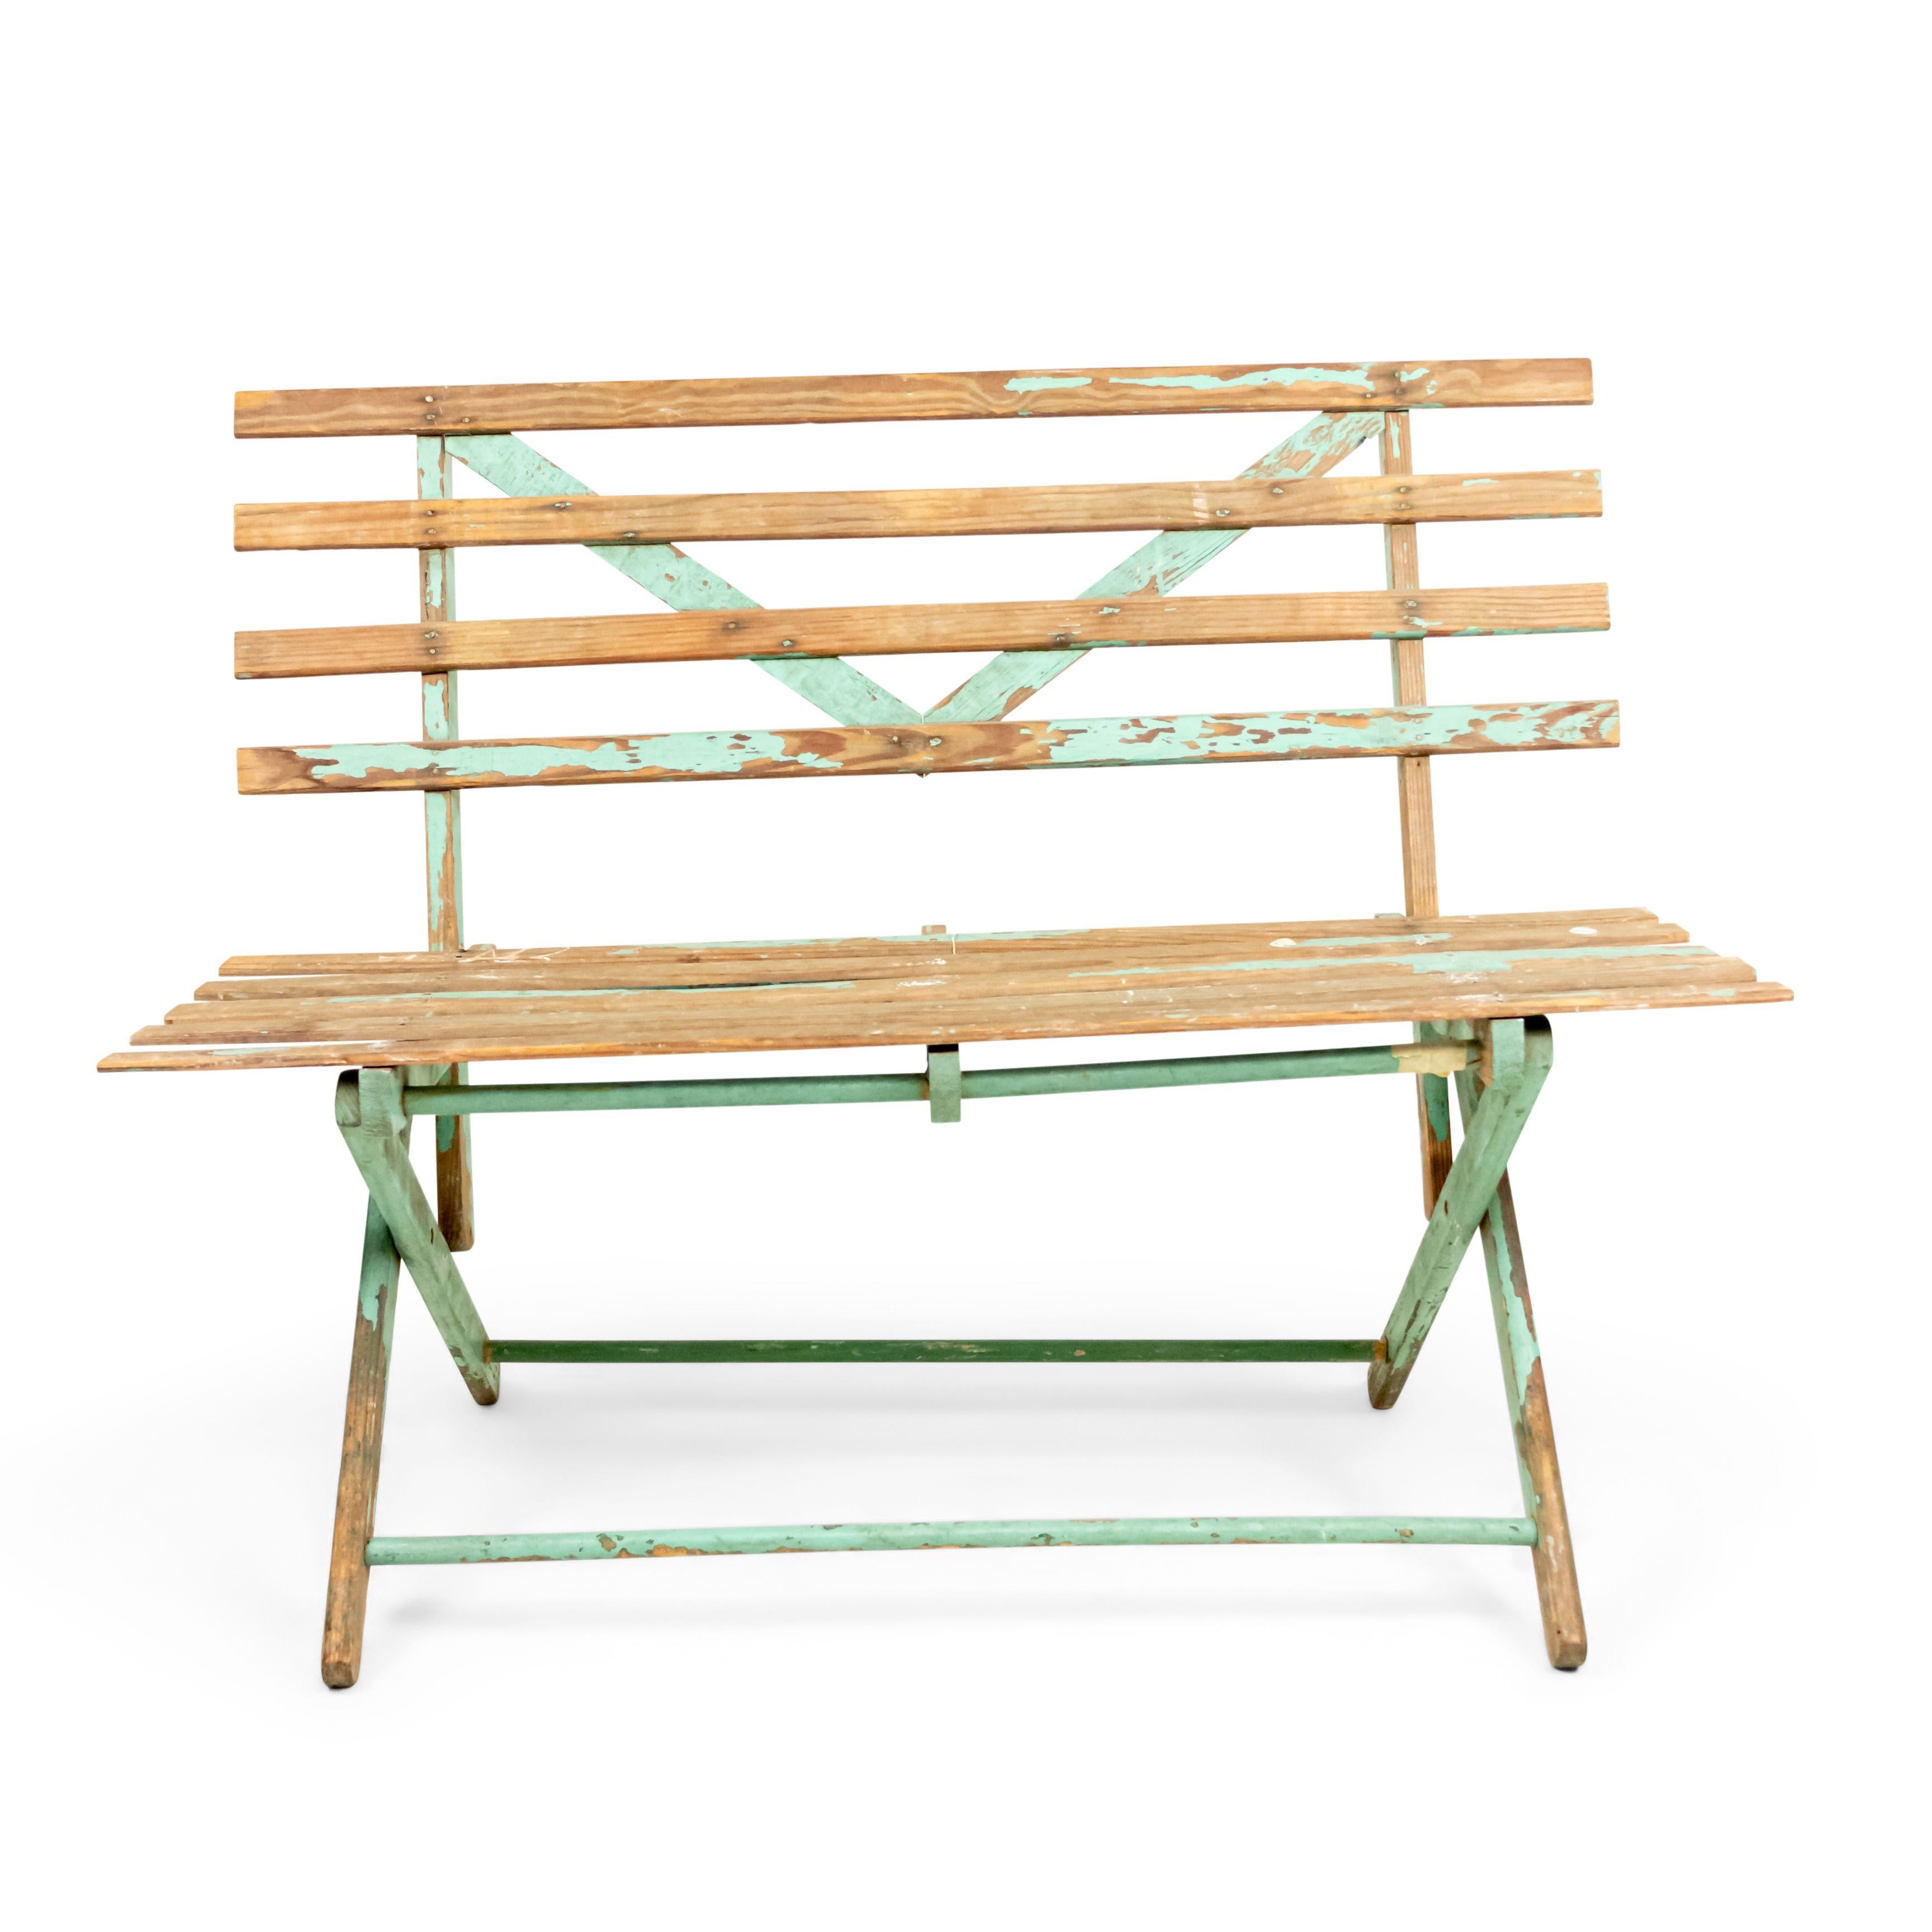 American Country style (19/20th century) outdoor folding bench with a weathered green painted slat design seat and back.
     